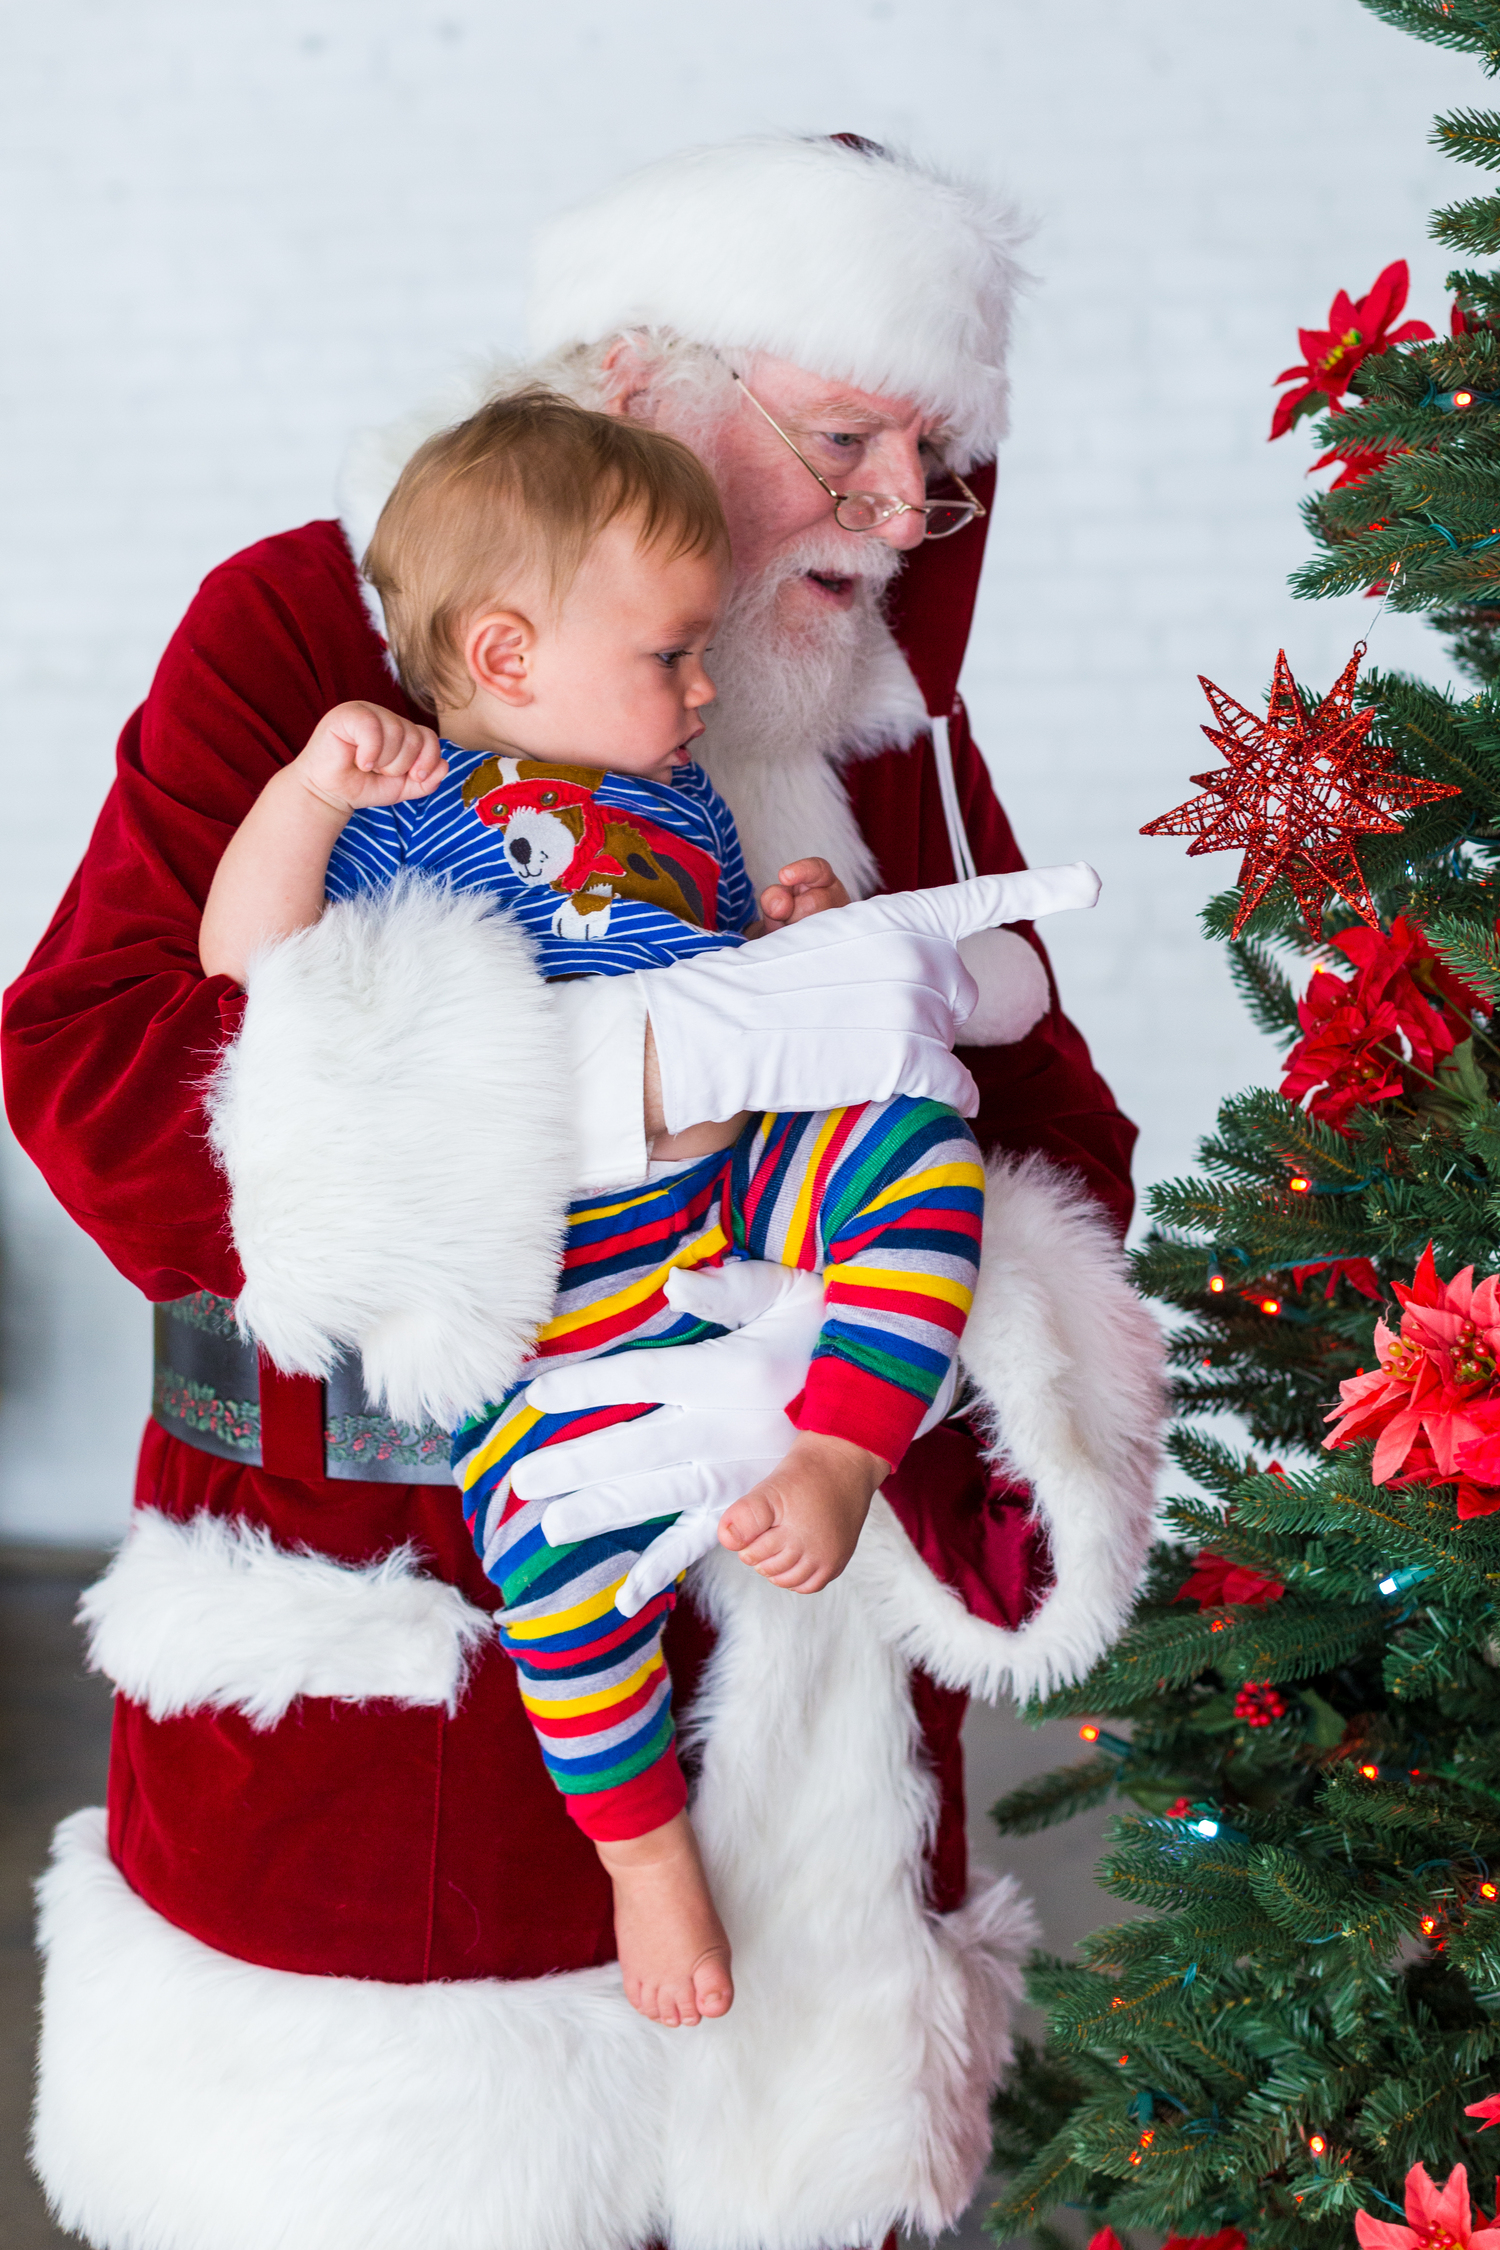 Santa holding an infant up to a Christmas tree